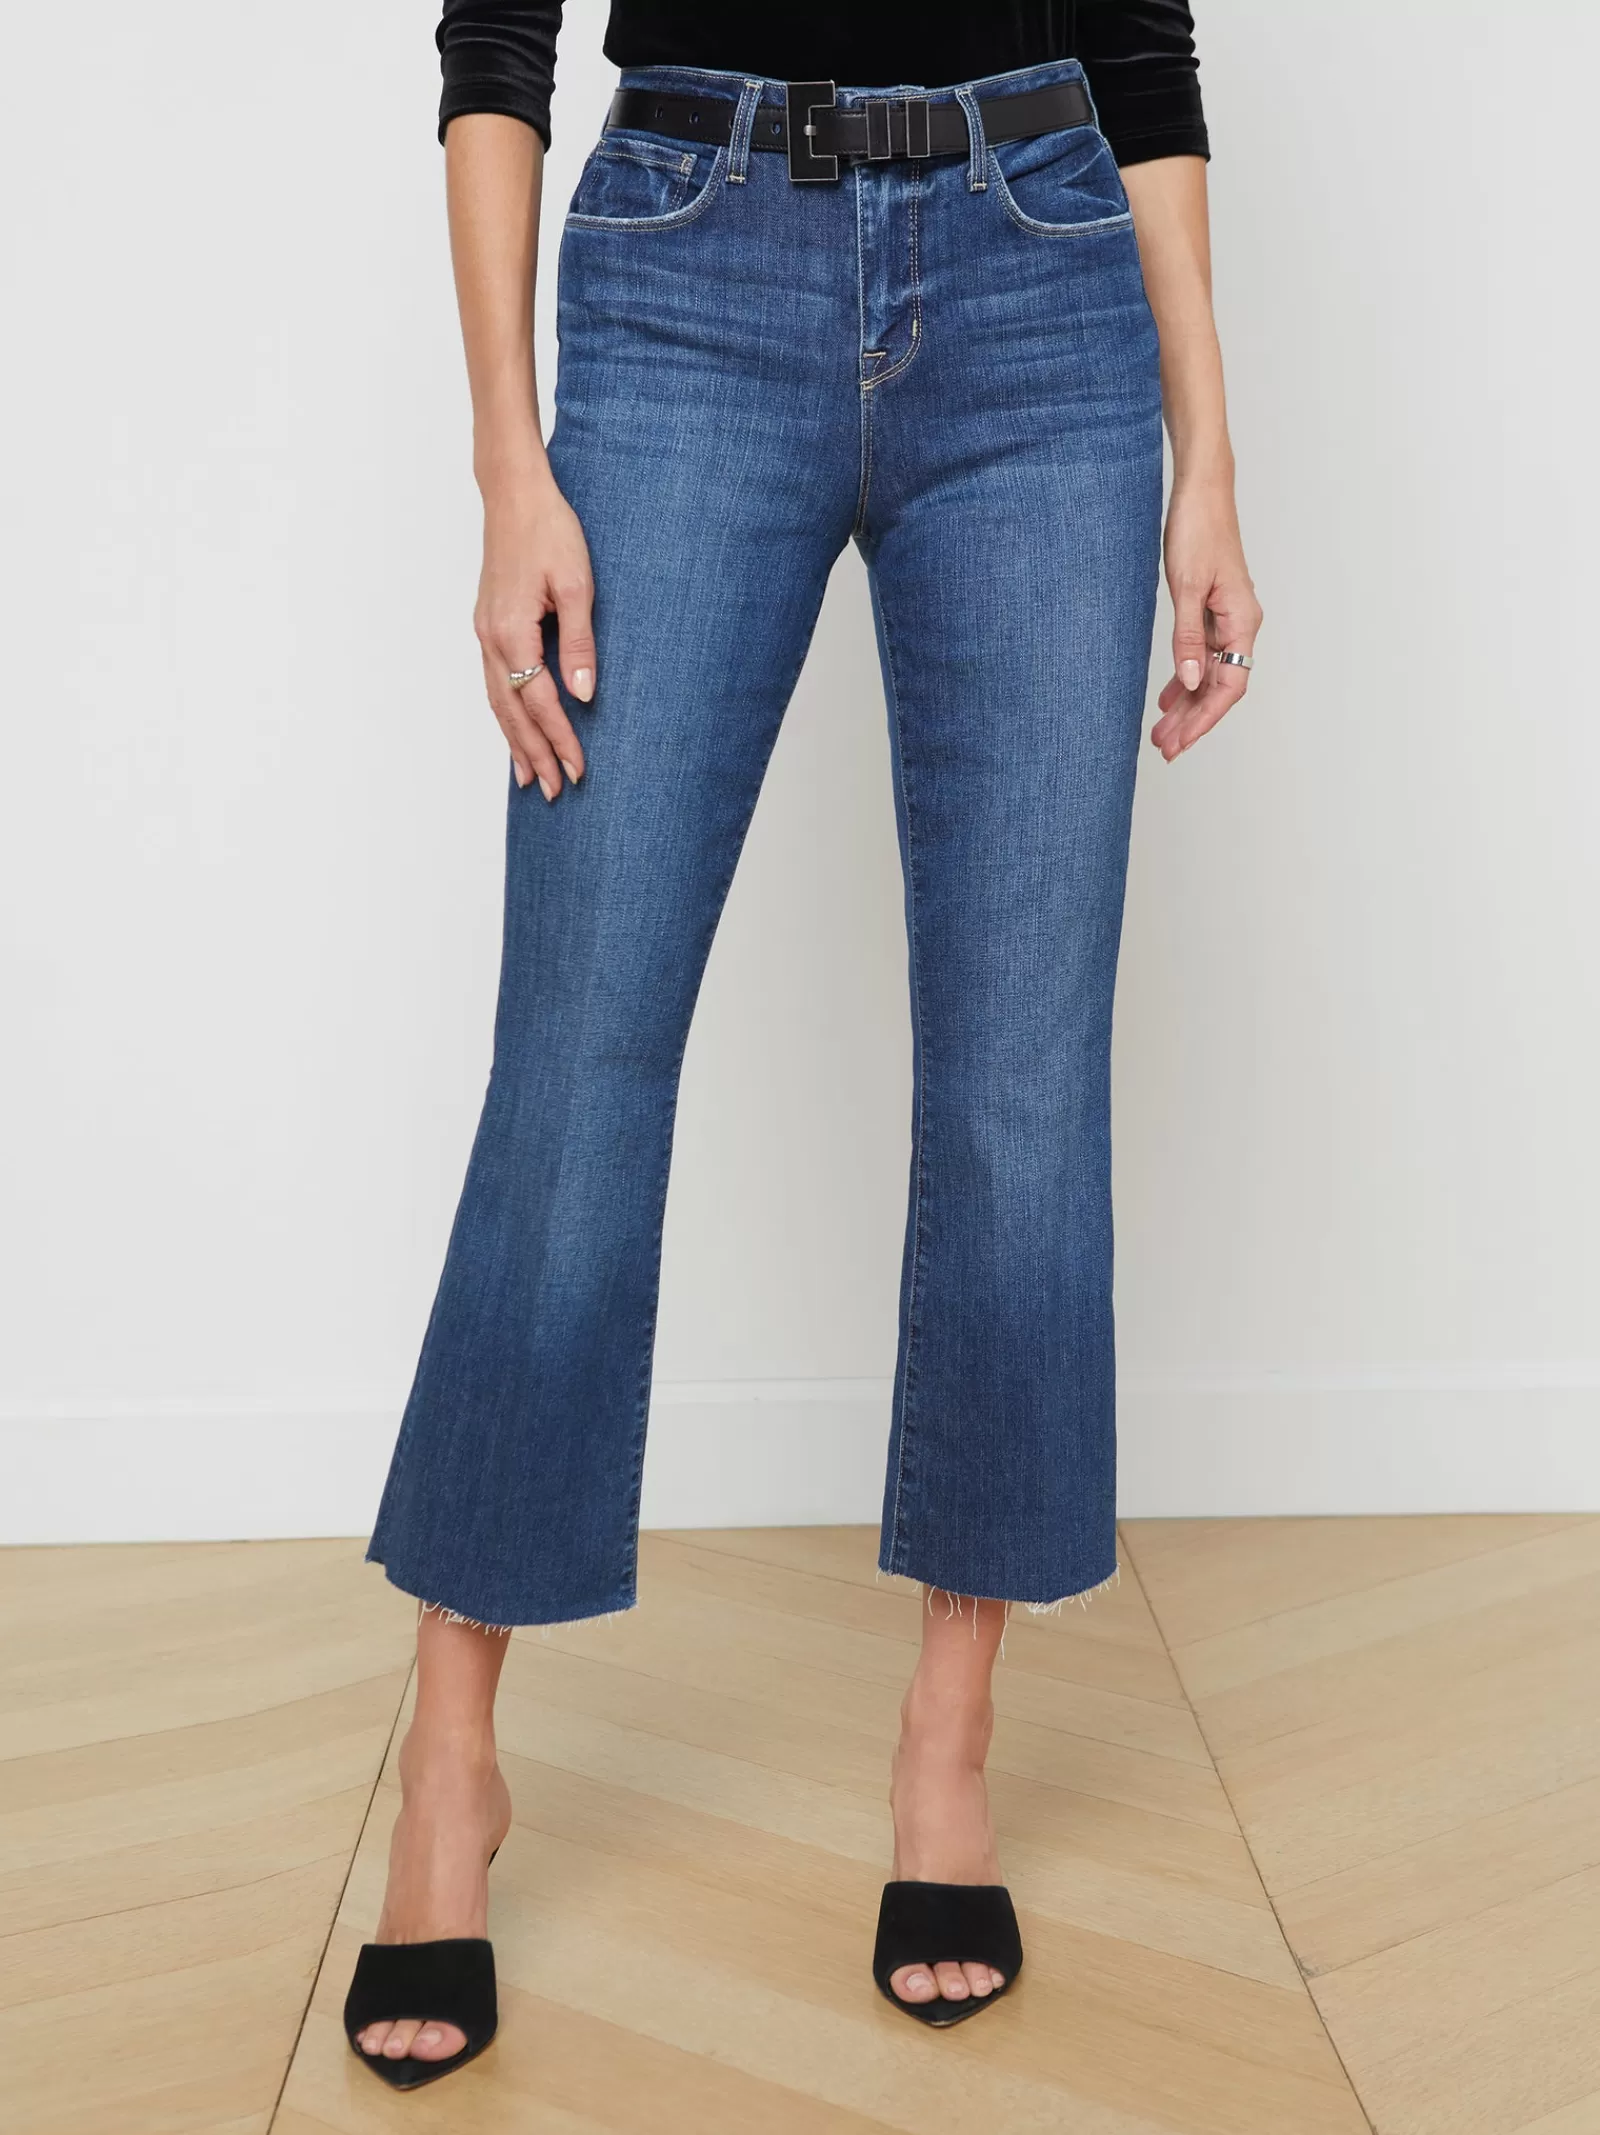 L'AGENCE Kendra Cropped Flare Jean< Petite